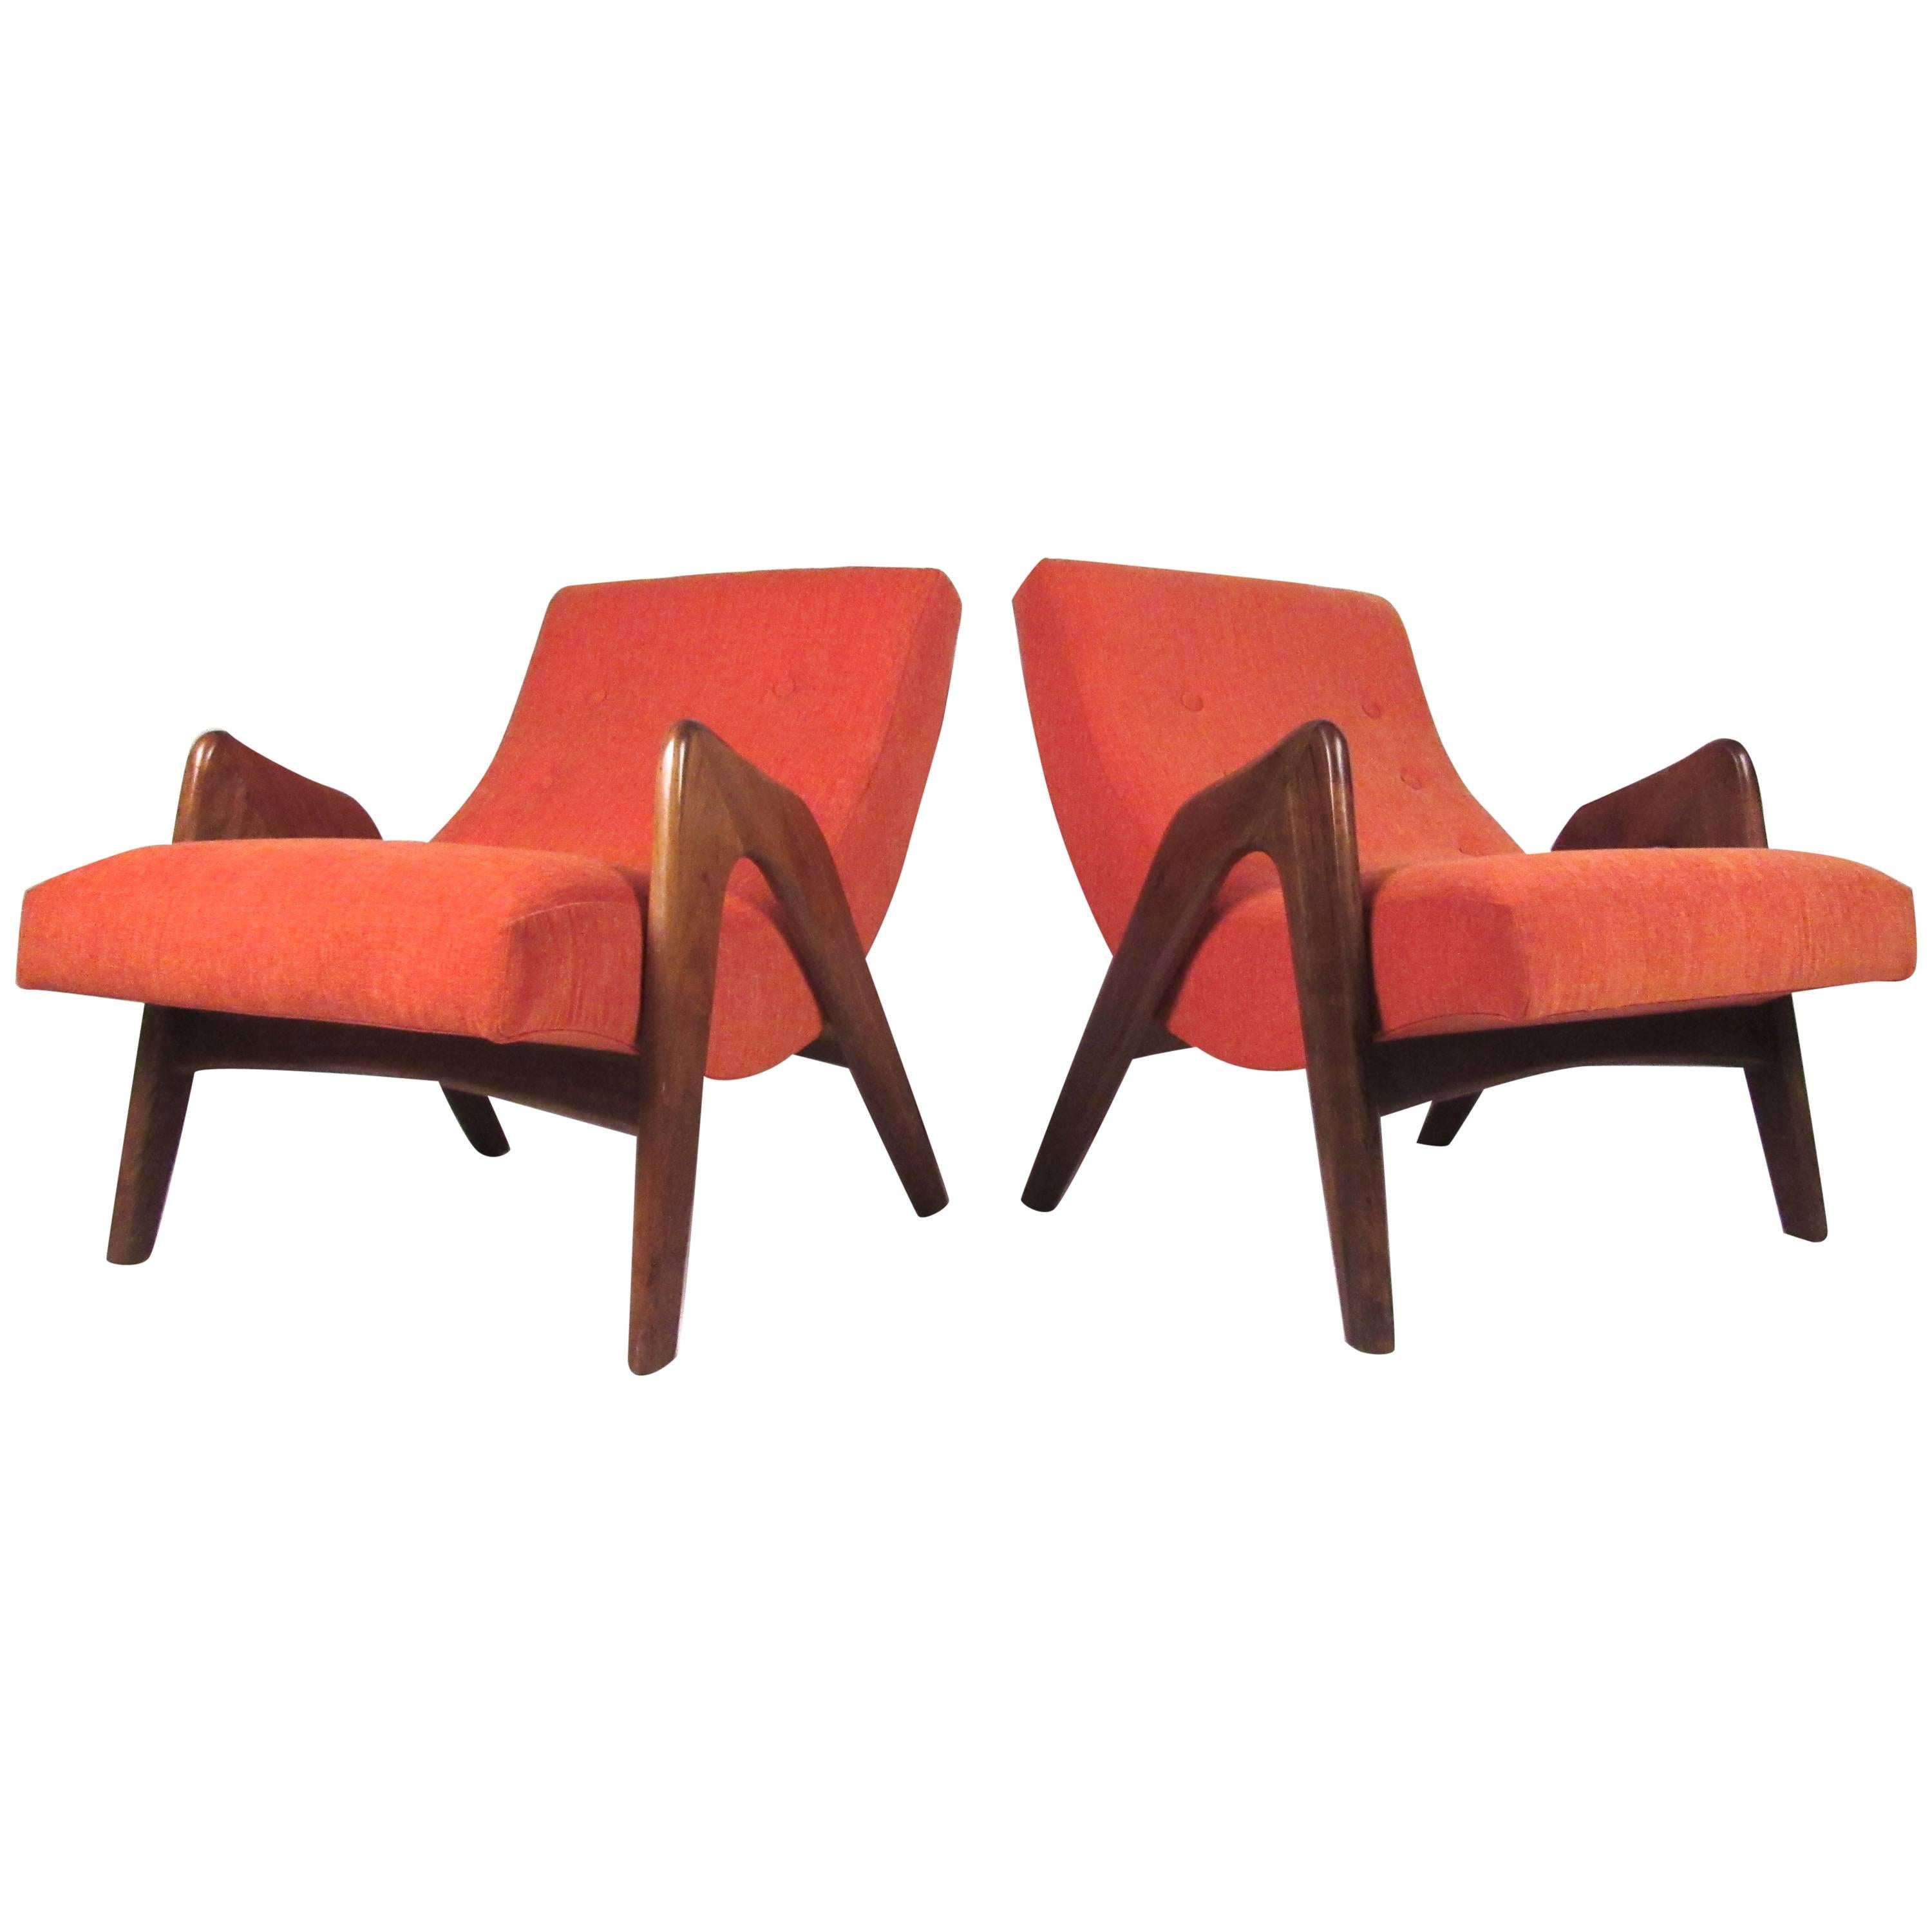 Mid-Century Modern Adrian Pearsall Lounge Chairs